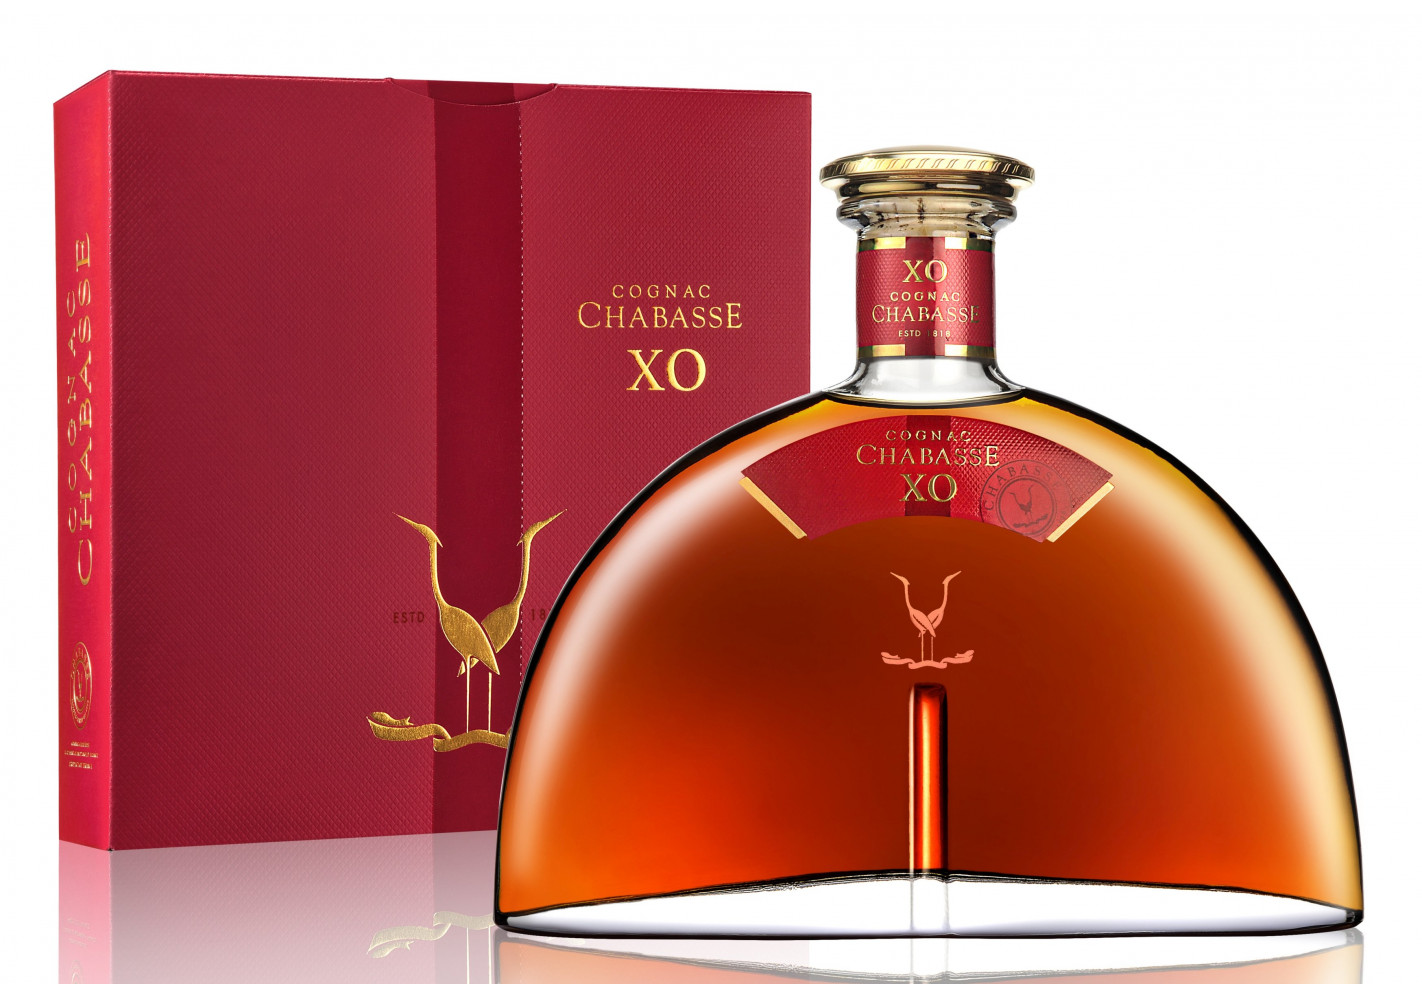 Chabasse XO Cognac - 70cl - Find Prices on